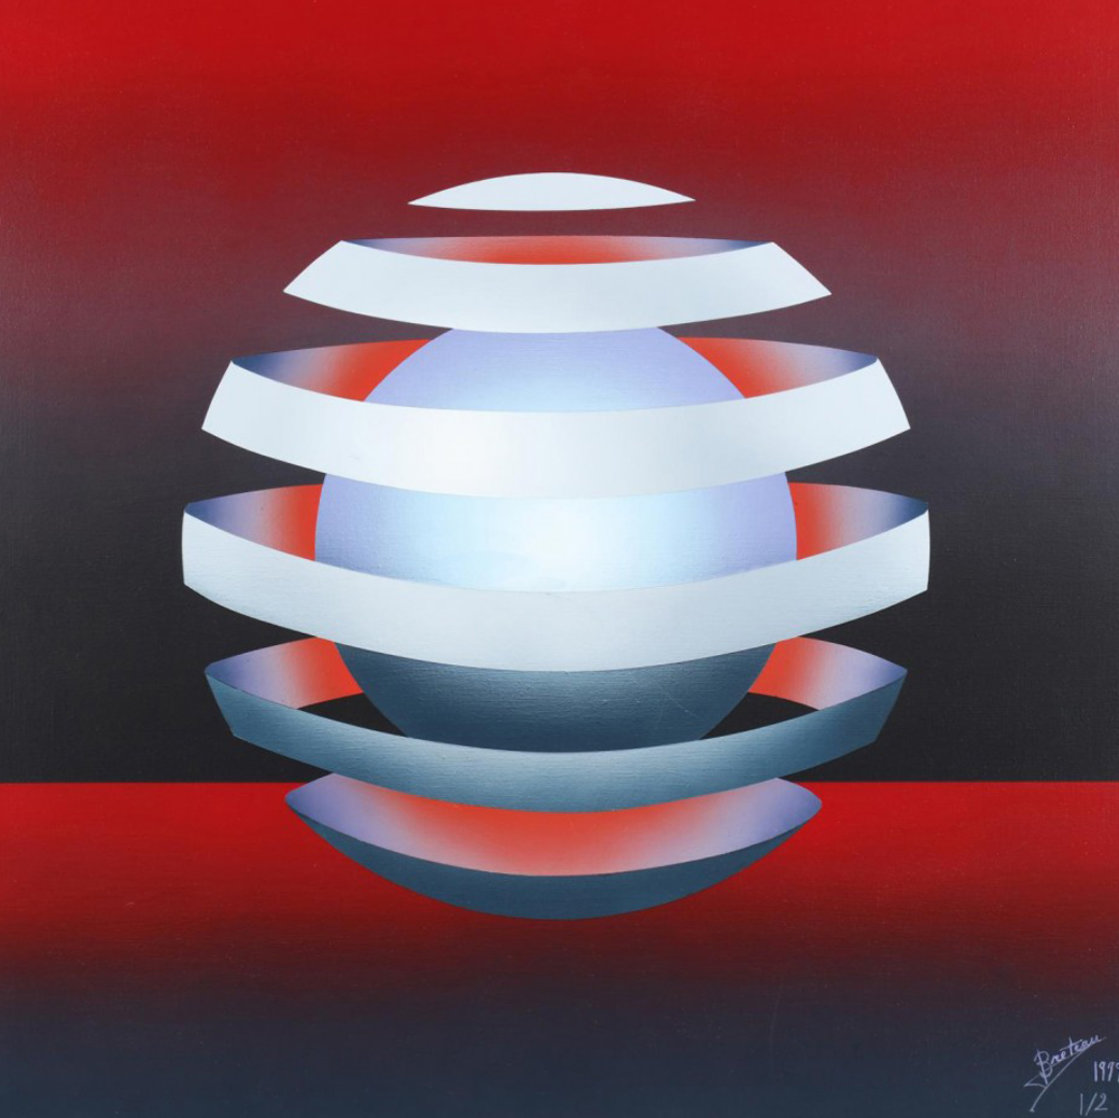 Untitled - Floating Orb on Red 1979 31x31 Original Painting by Patrice Breteau